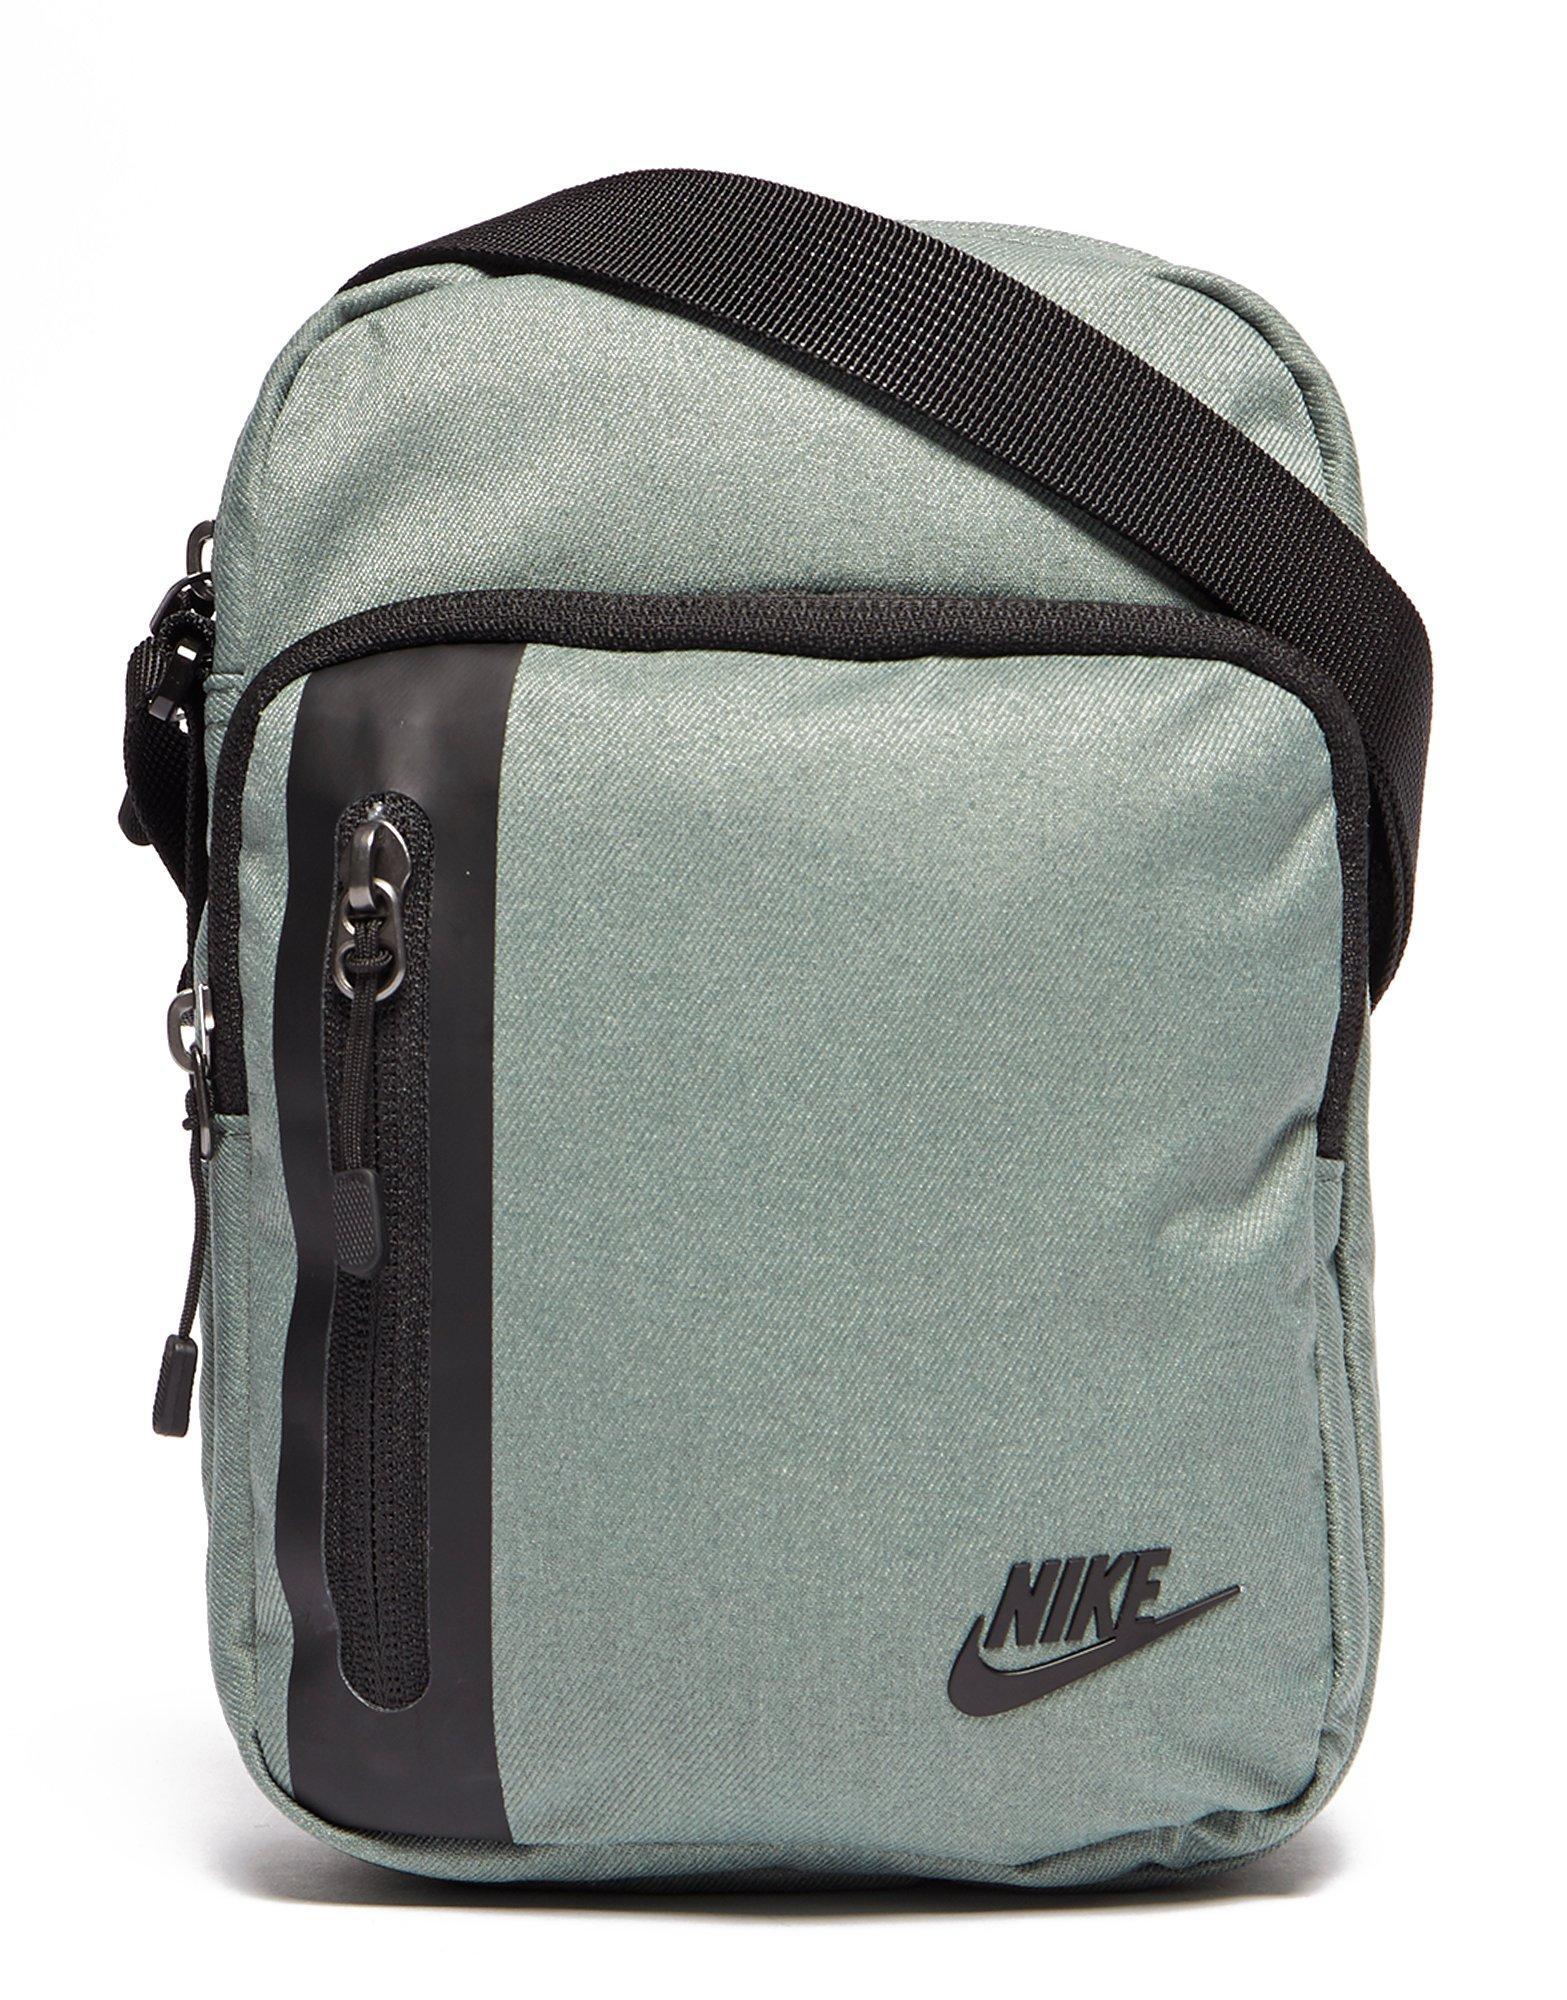 nike small pouch bag